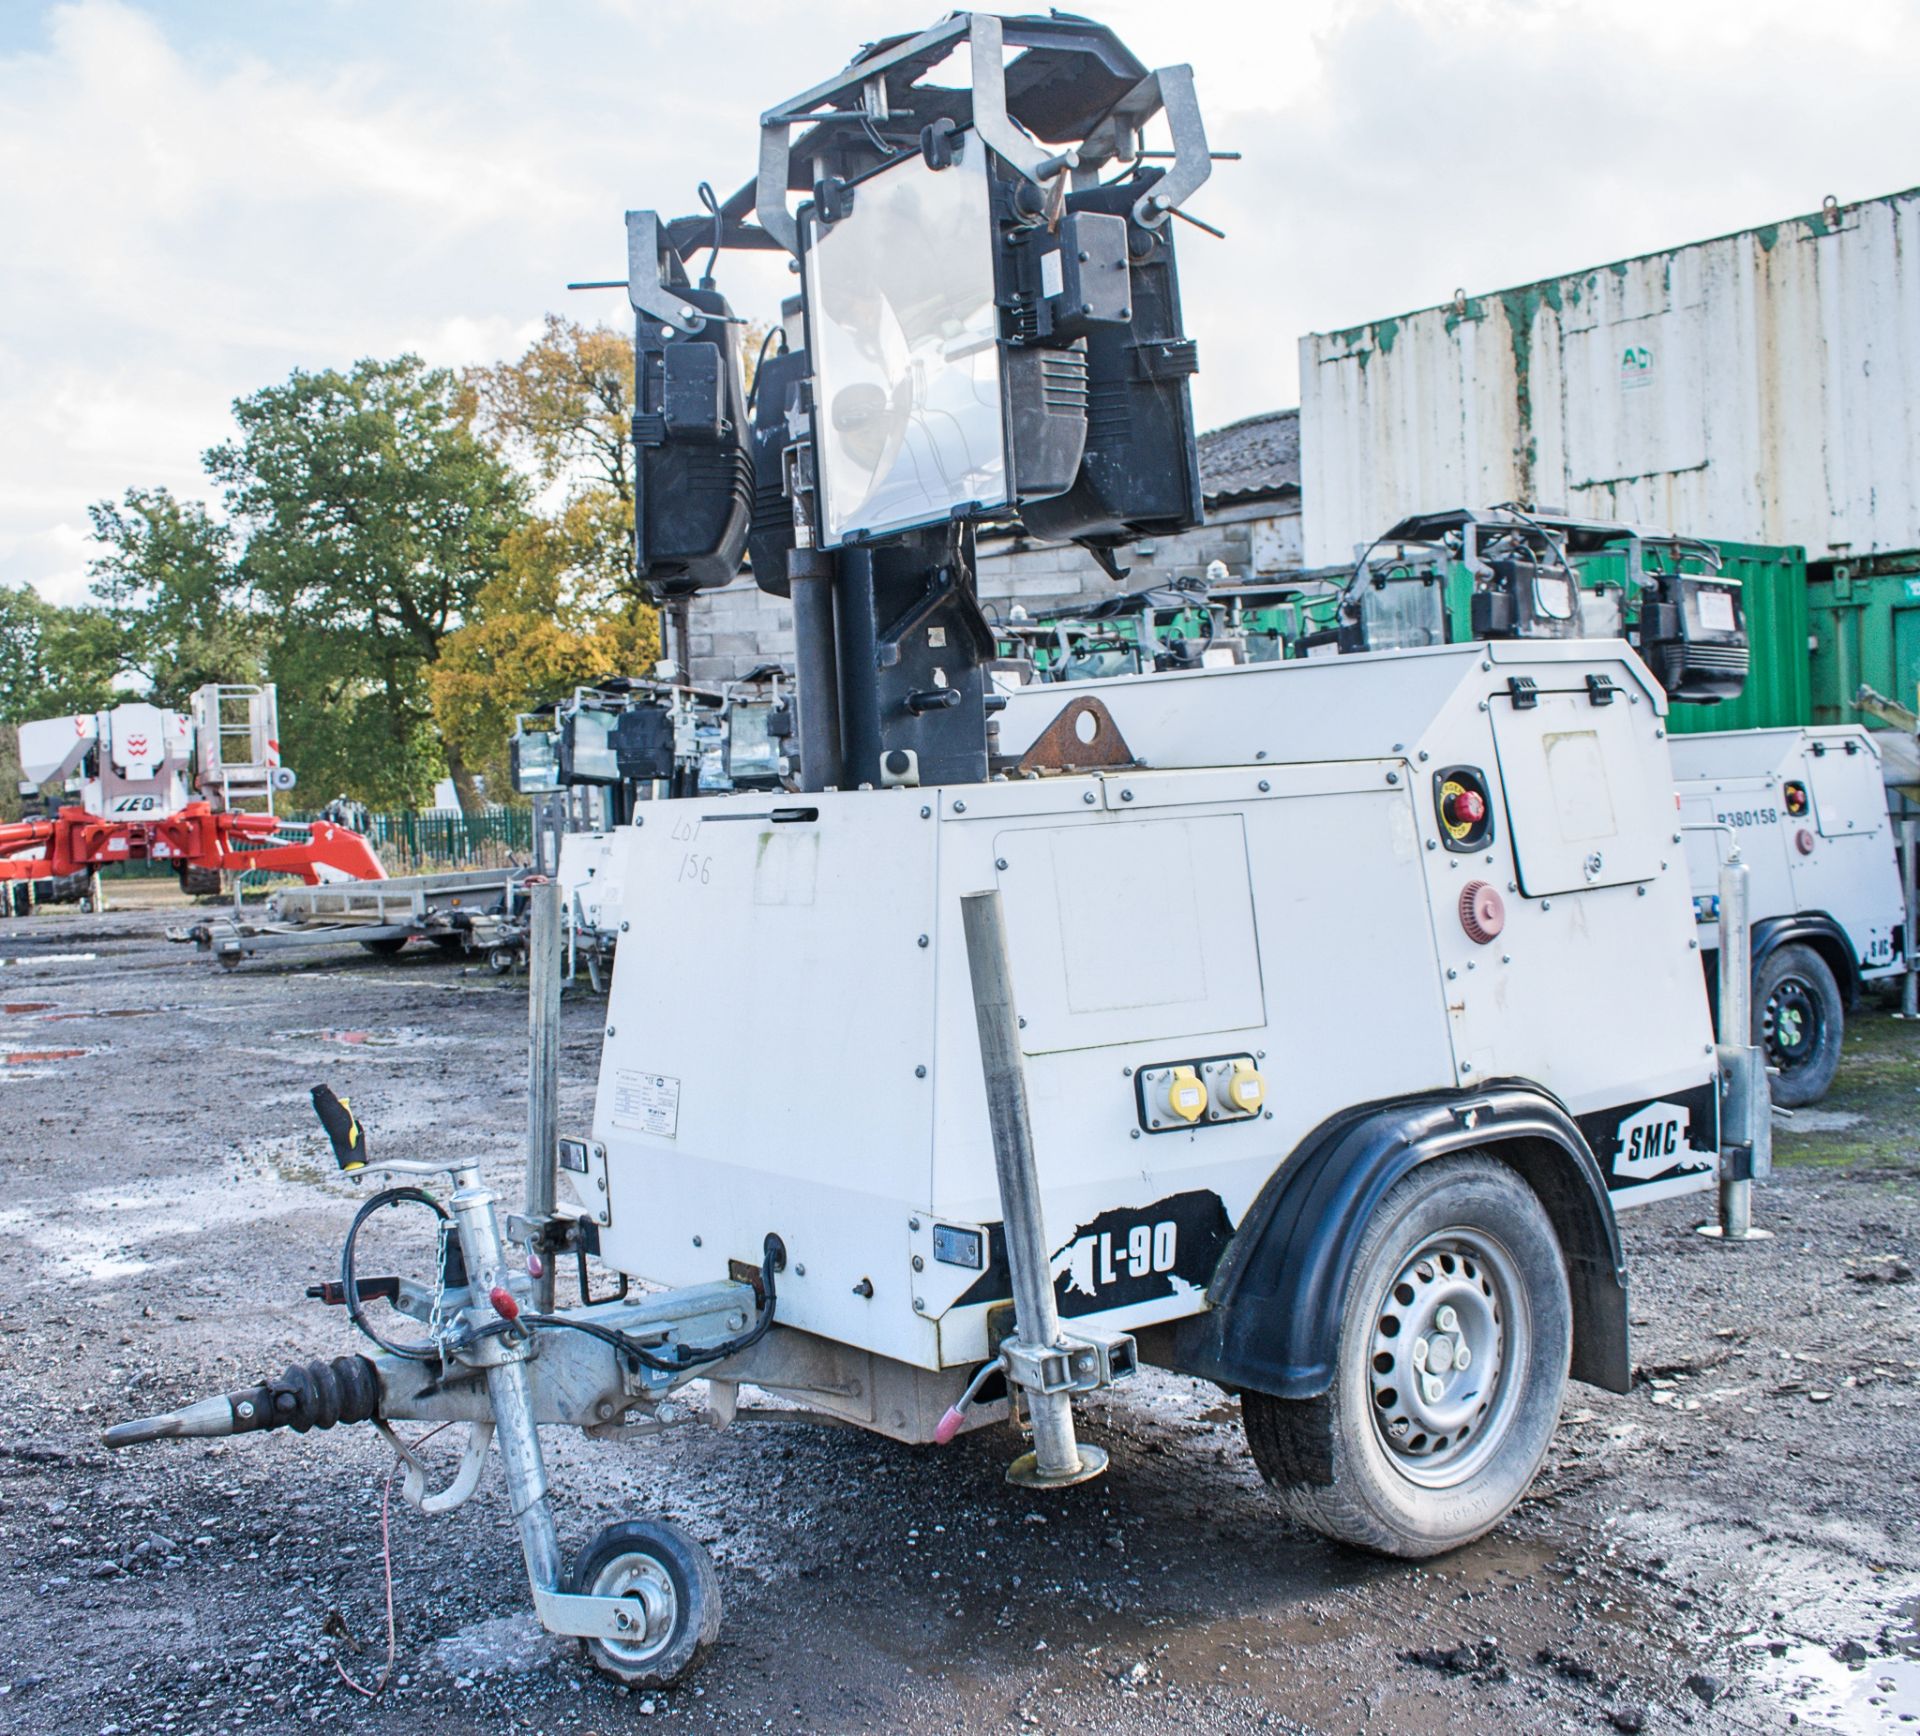 SMC TL-90 diesel driven mobile lighting tower Year: 2012 S/N: 1210011 Recorded hours: 6998 R380206